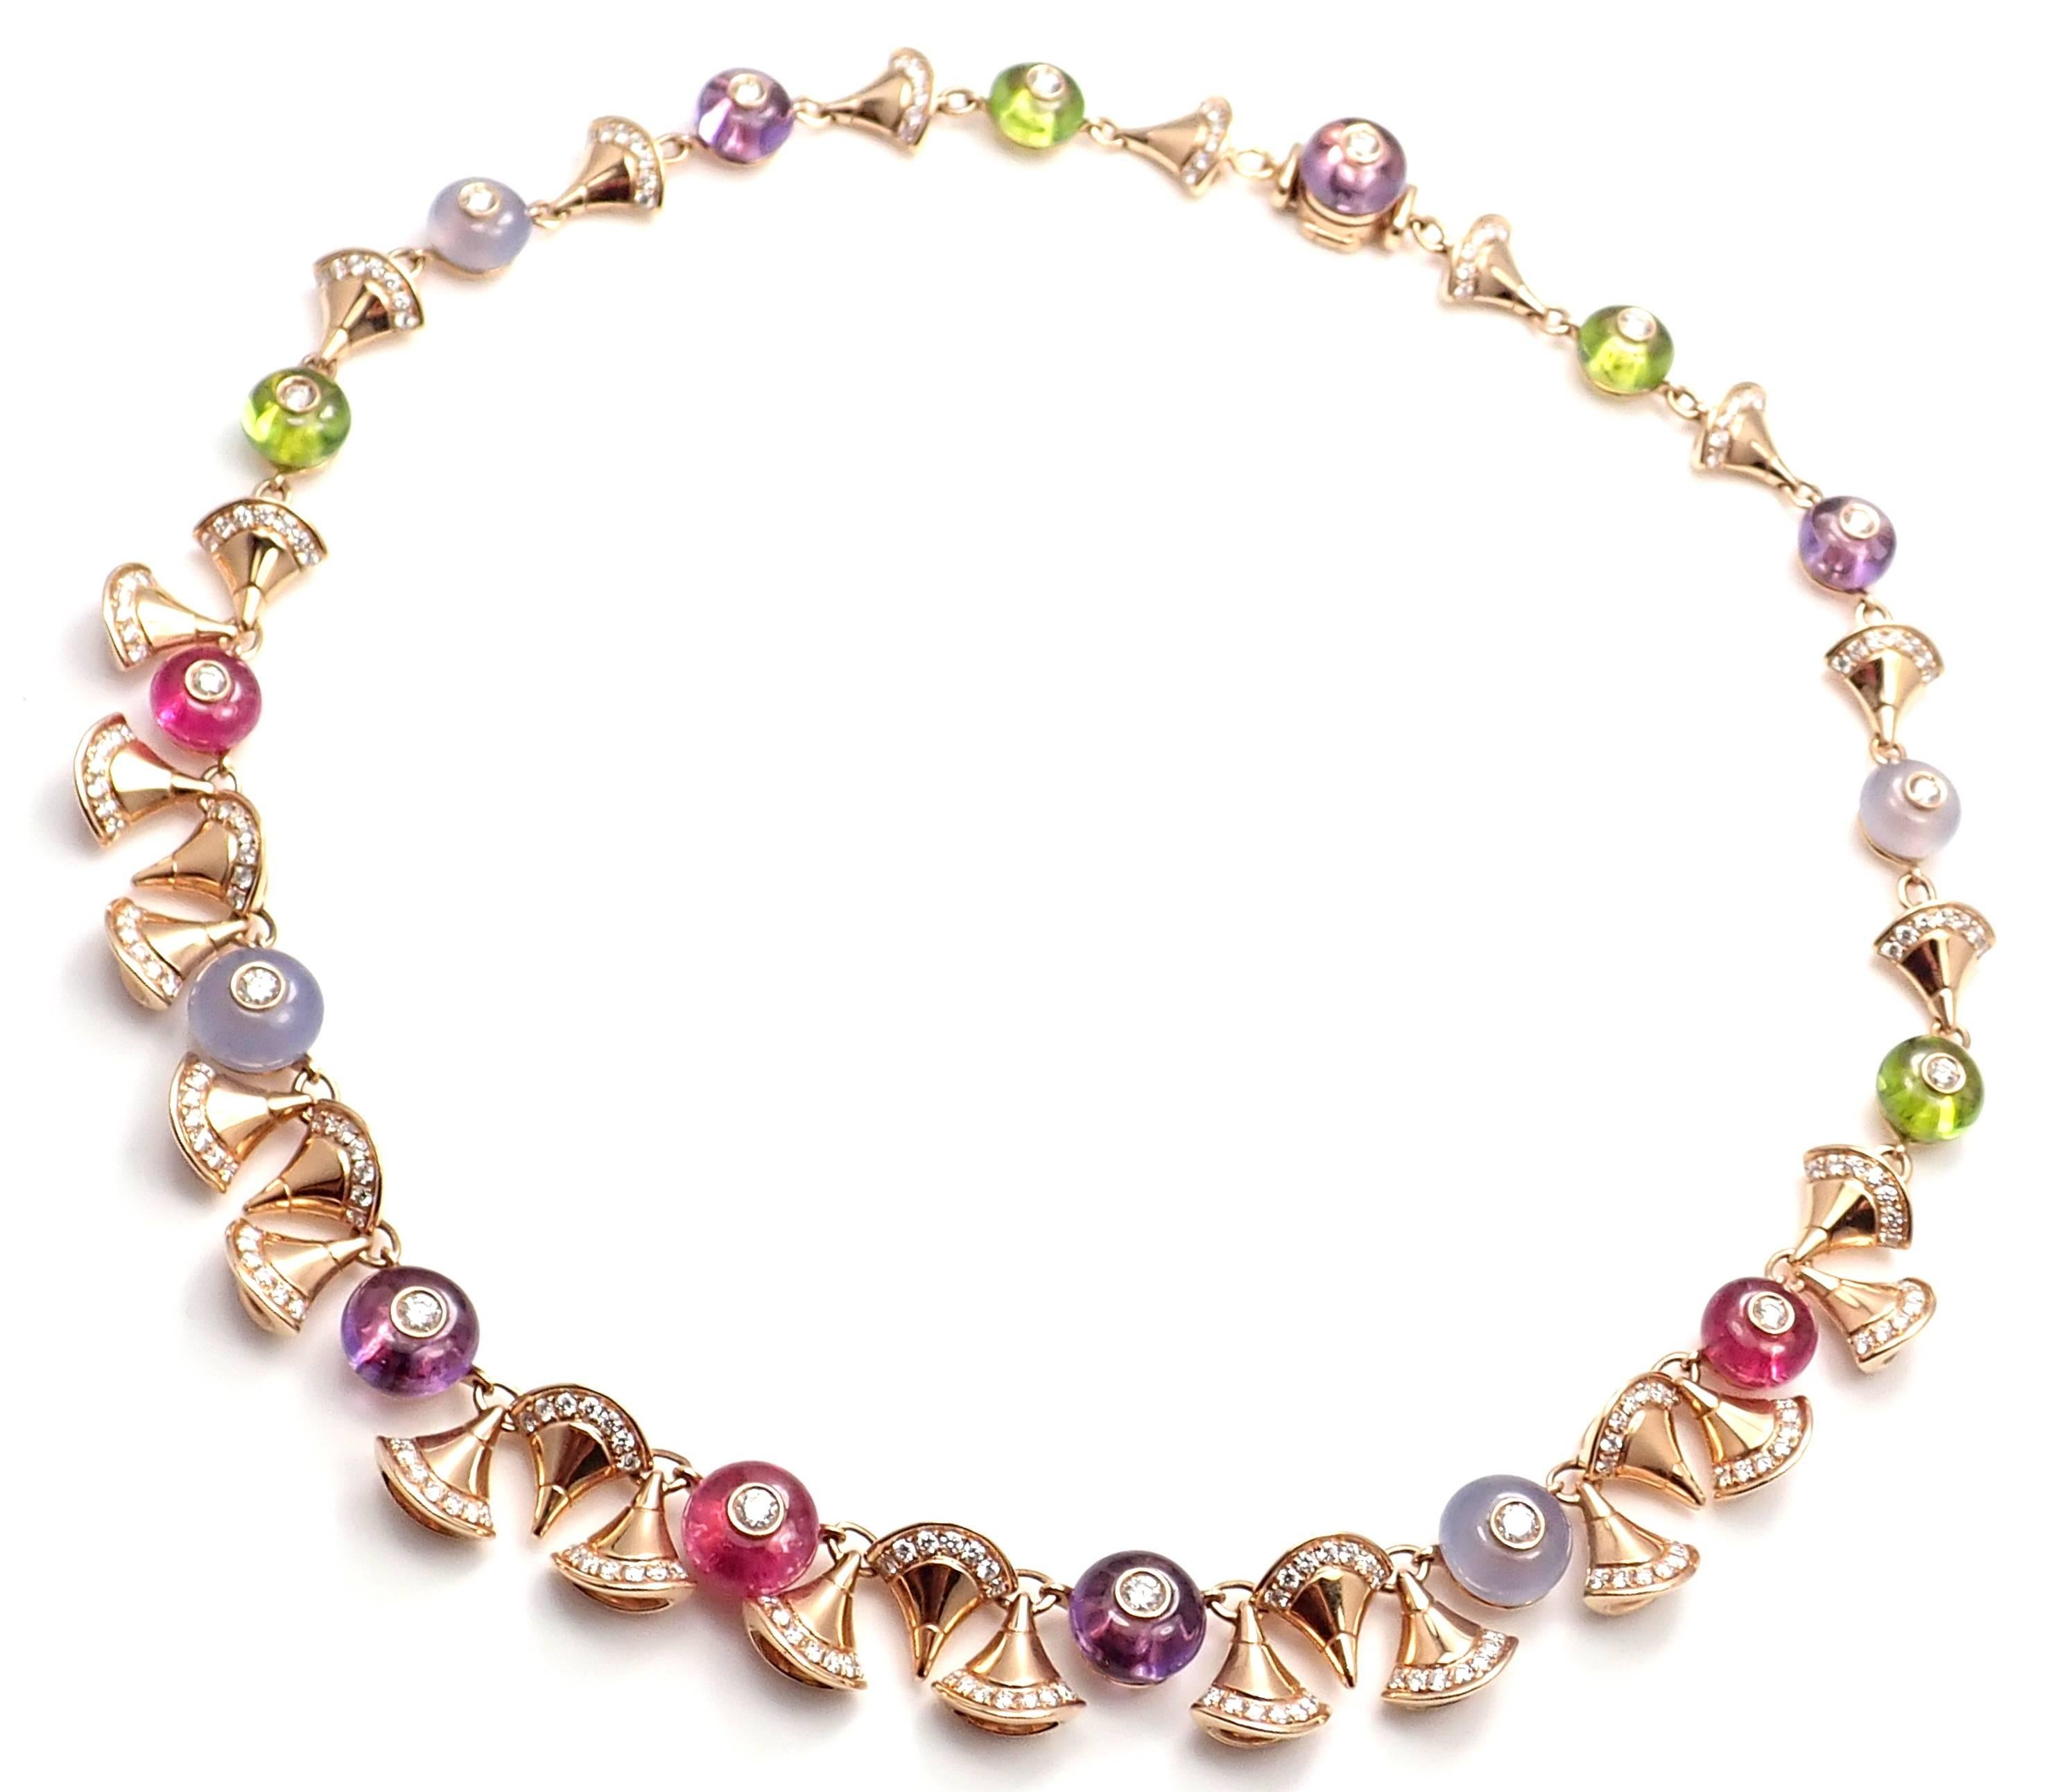 18k Rose Gold Diamond Amethyst Rubellite Peridot Chalcedony Necklace by Bulgari. 
With round brilliant cut diamonds amethysts, peridots, rubellites, chalcedonies.
This necklace is SOLD OUT!
The Retail Price of this necklace was $54,100 plus